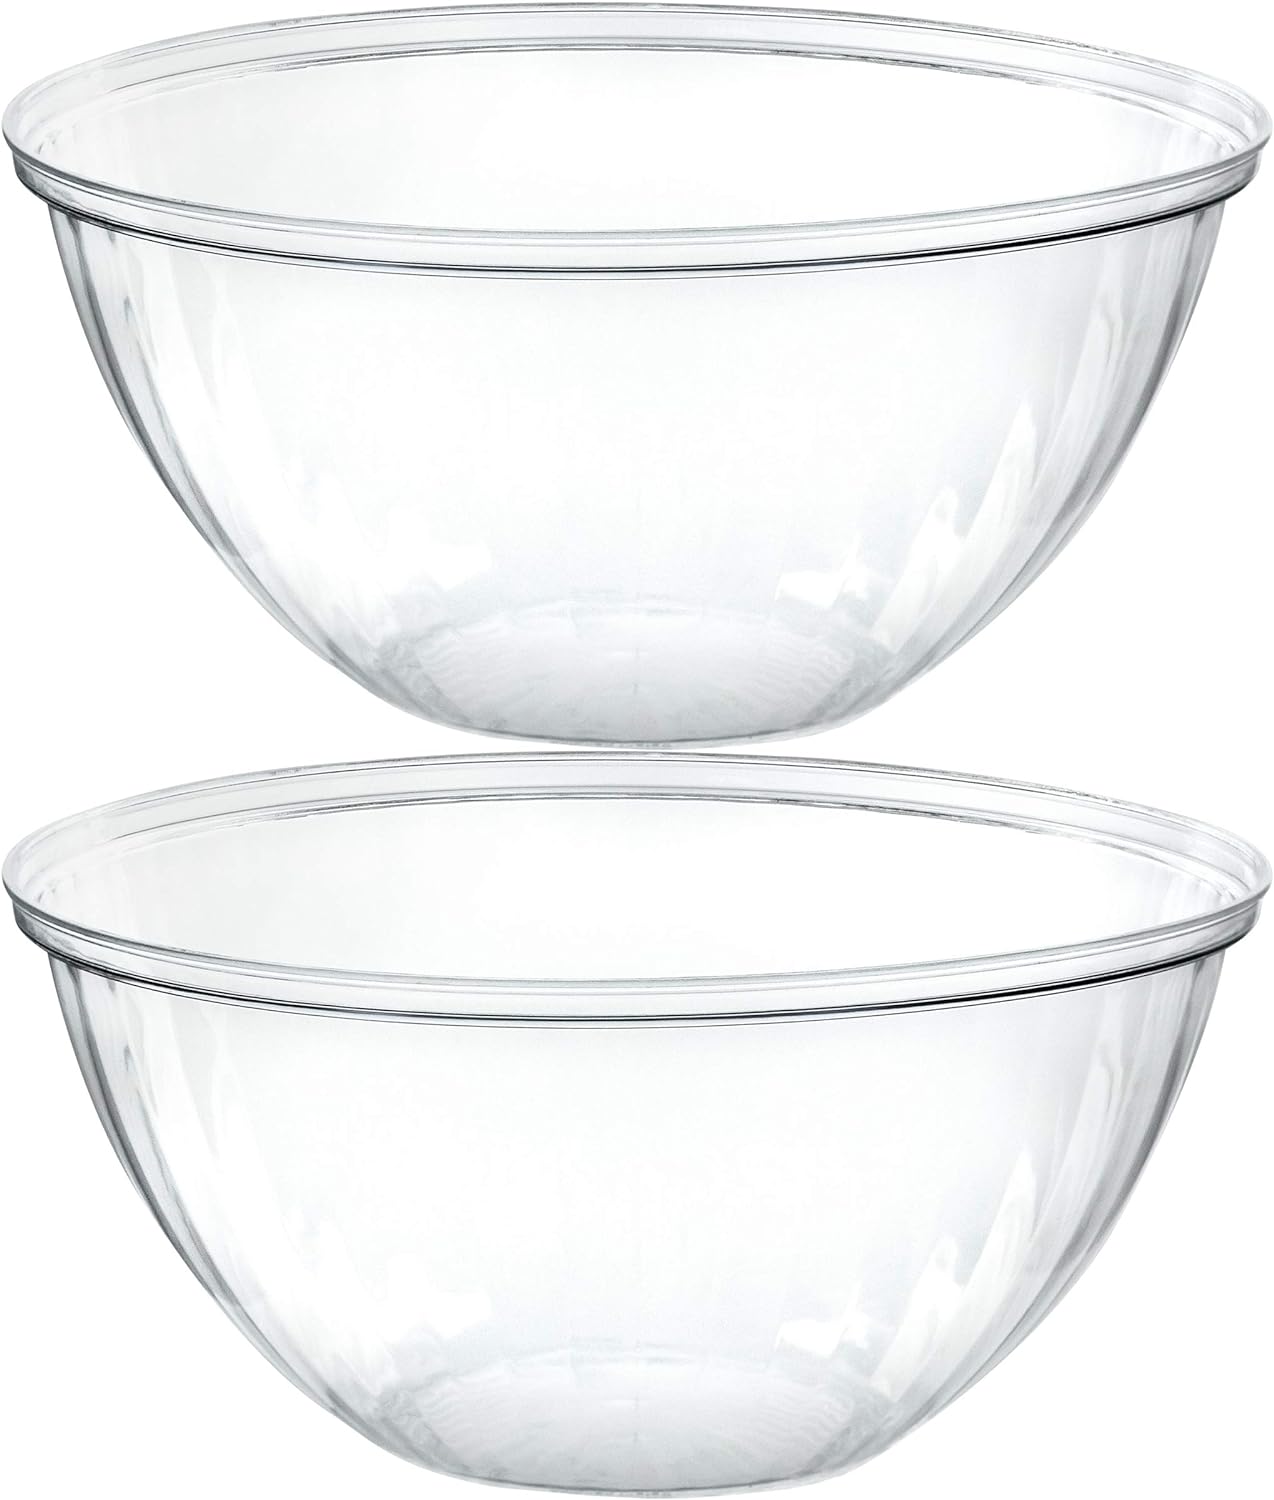 PLASTICPRO Disposable 150 Ounce Round Crystal Clear Plastic Serving Bowls for Snack or Chip ,Candy Dish, Party Salad Container Pack of 2